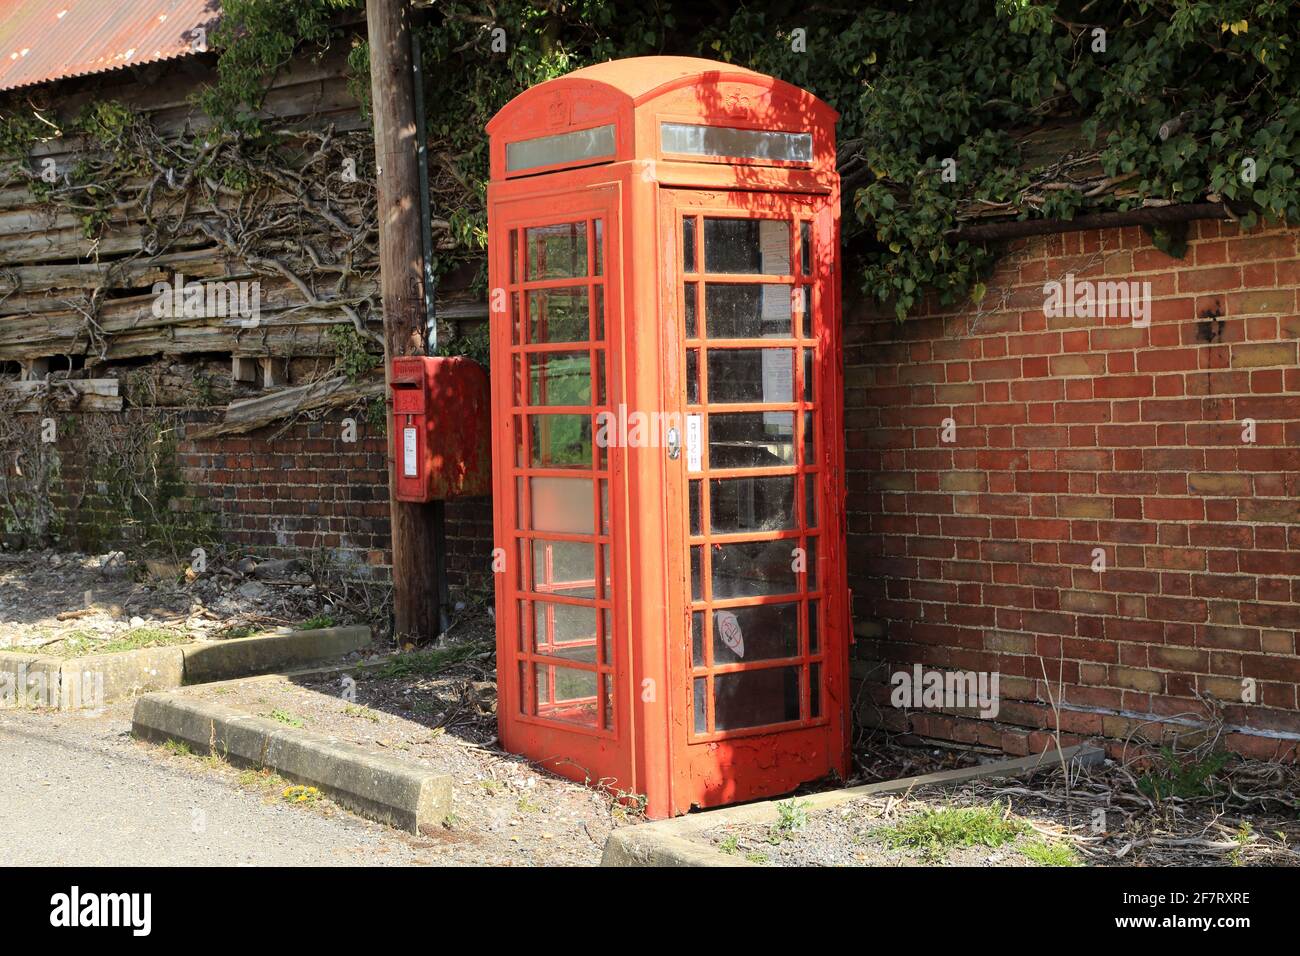 Old red telephone box and red letterbox in village of Stowting on the edge of the North Downs, Stowting Hill, Stowting, Kent, United Kingdom Stock Photo